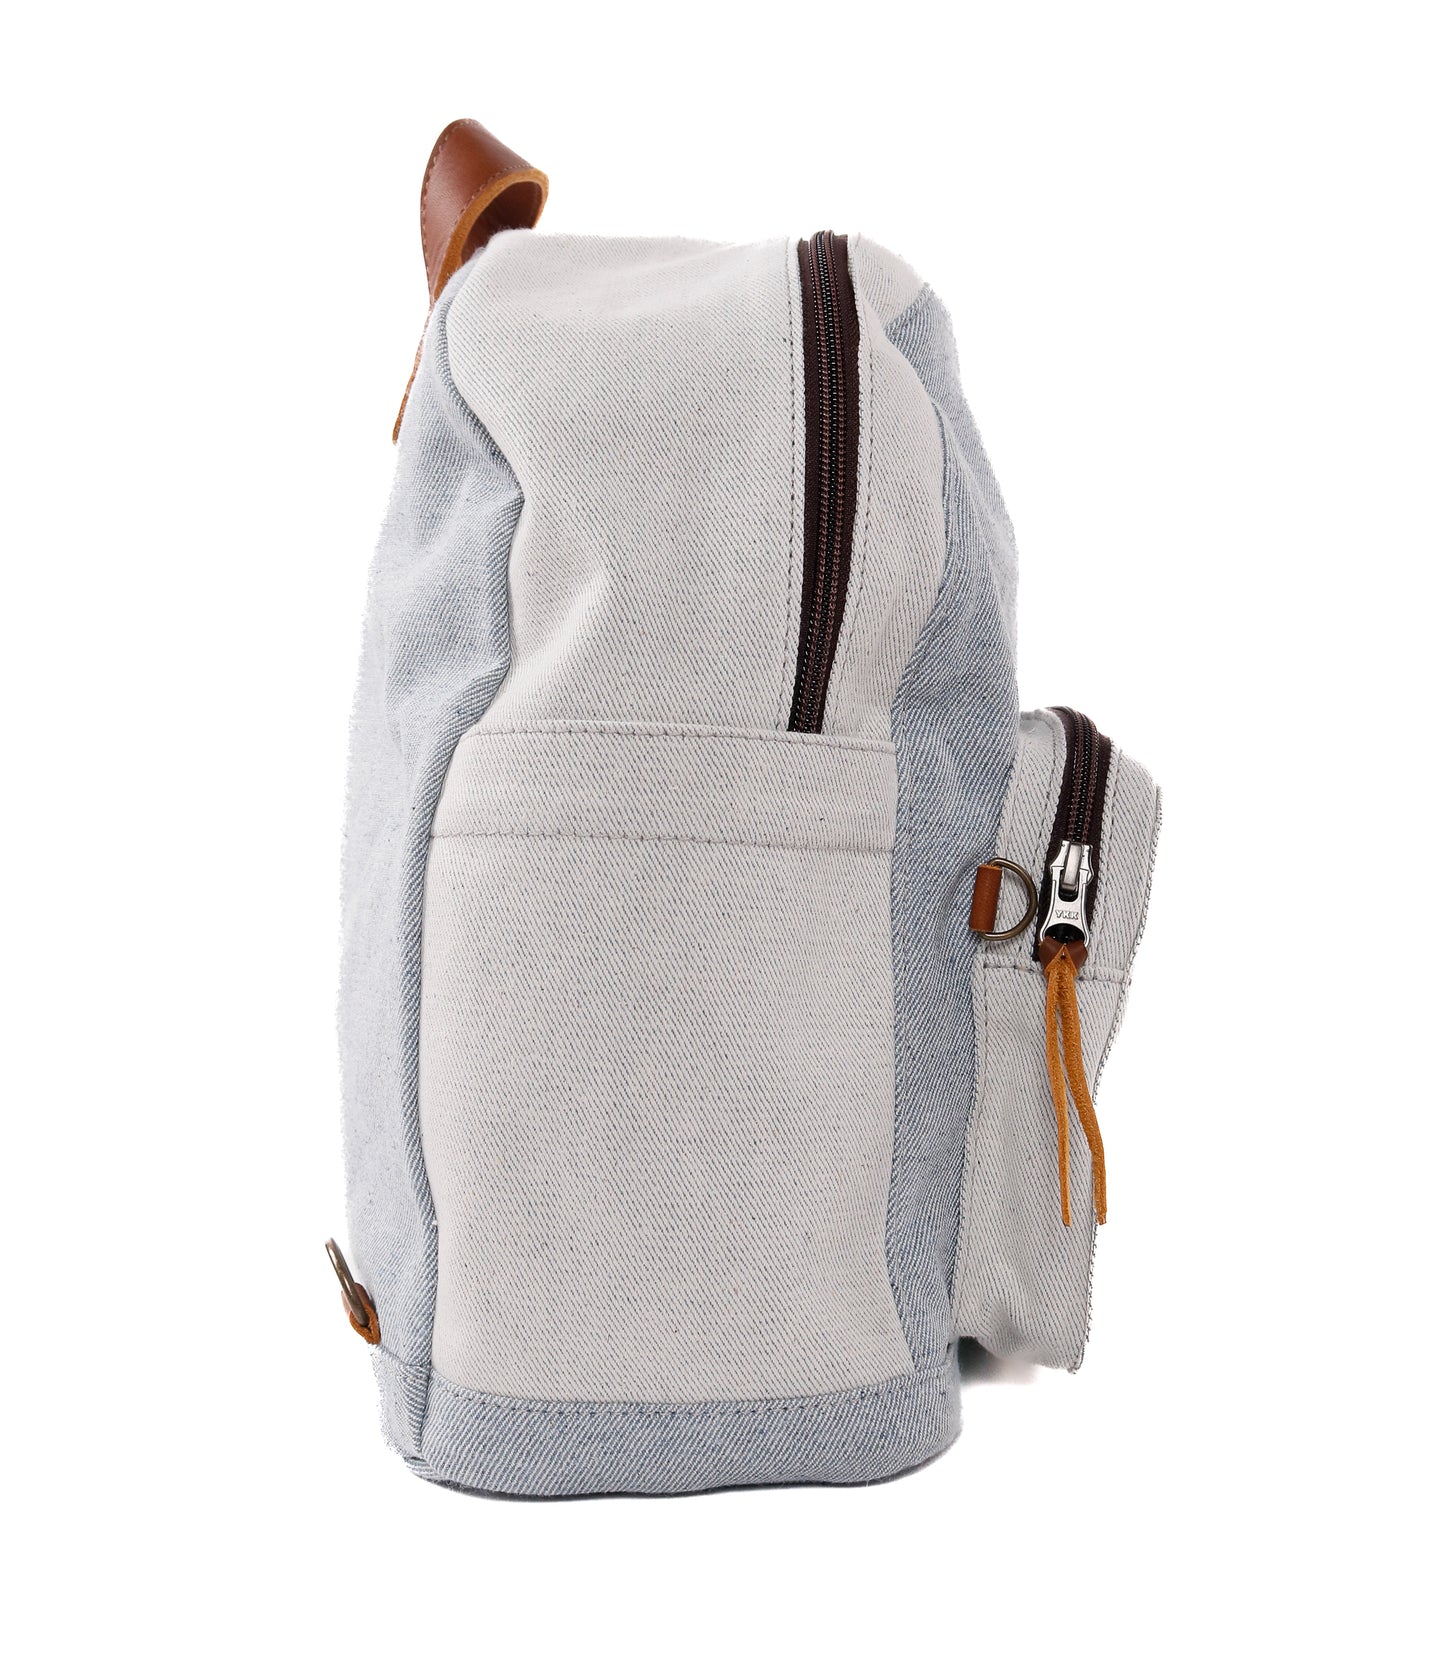 CLASSIC BACKPACK - UPCYCLED DENIM